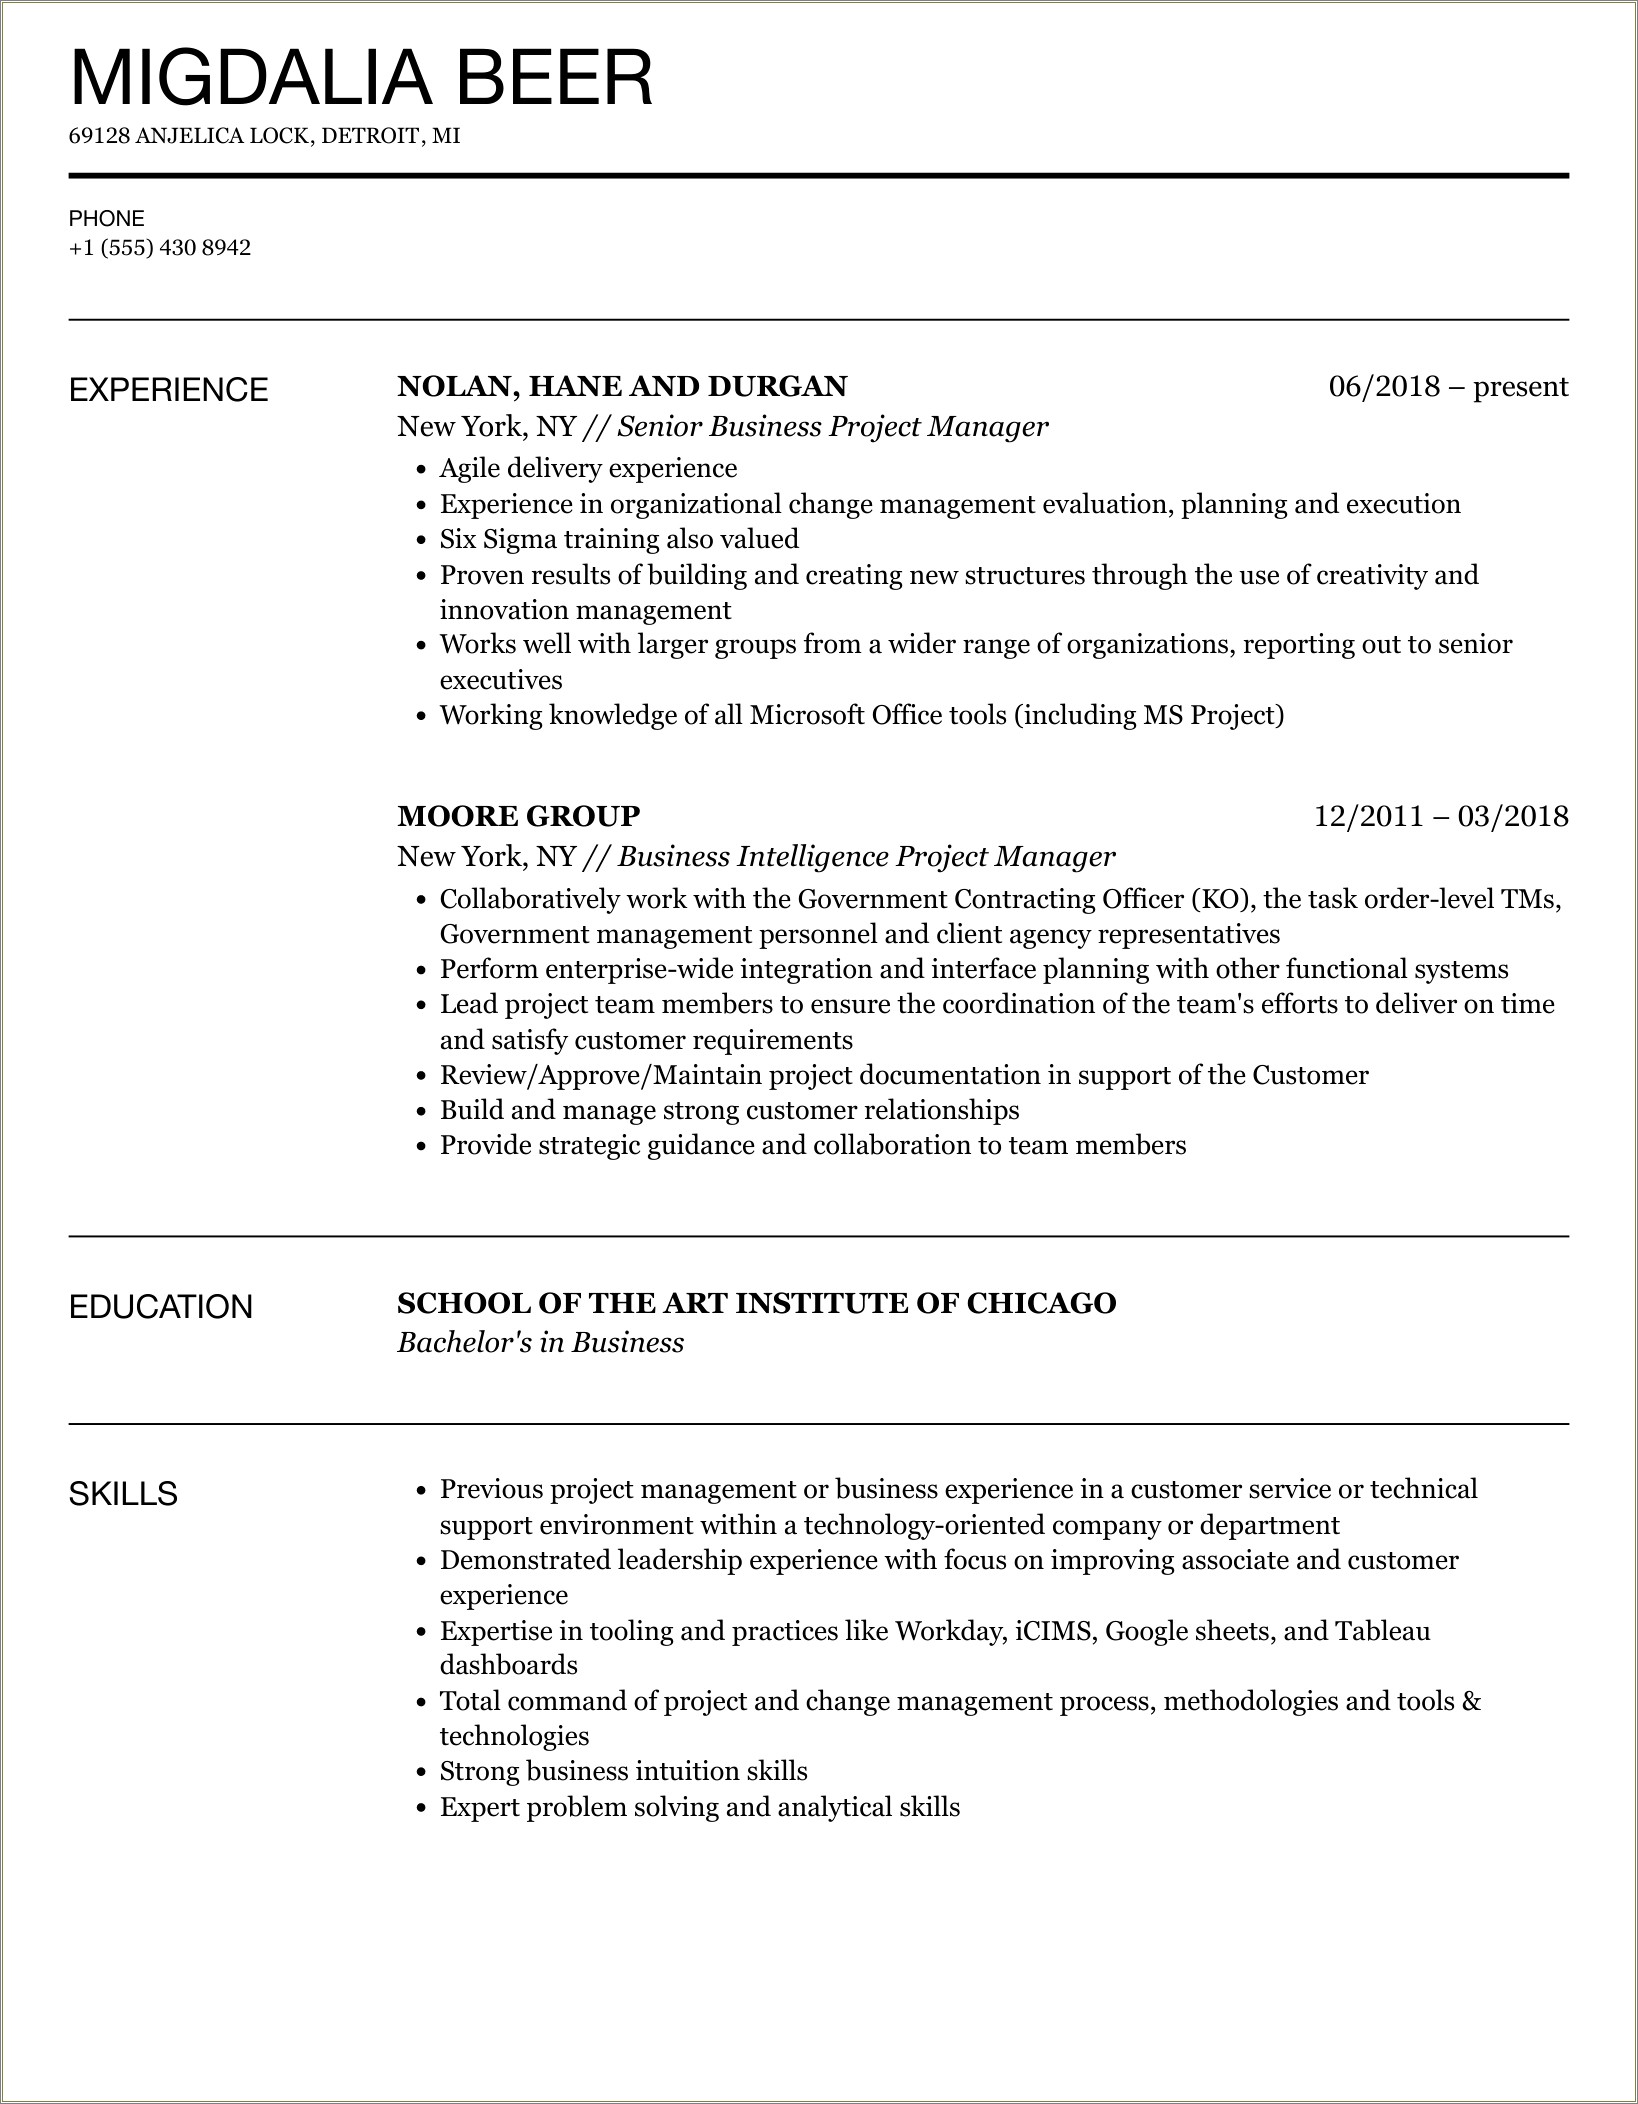 Resume To Show Experience In All Business Areas